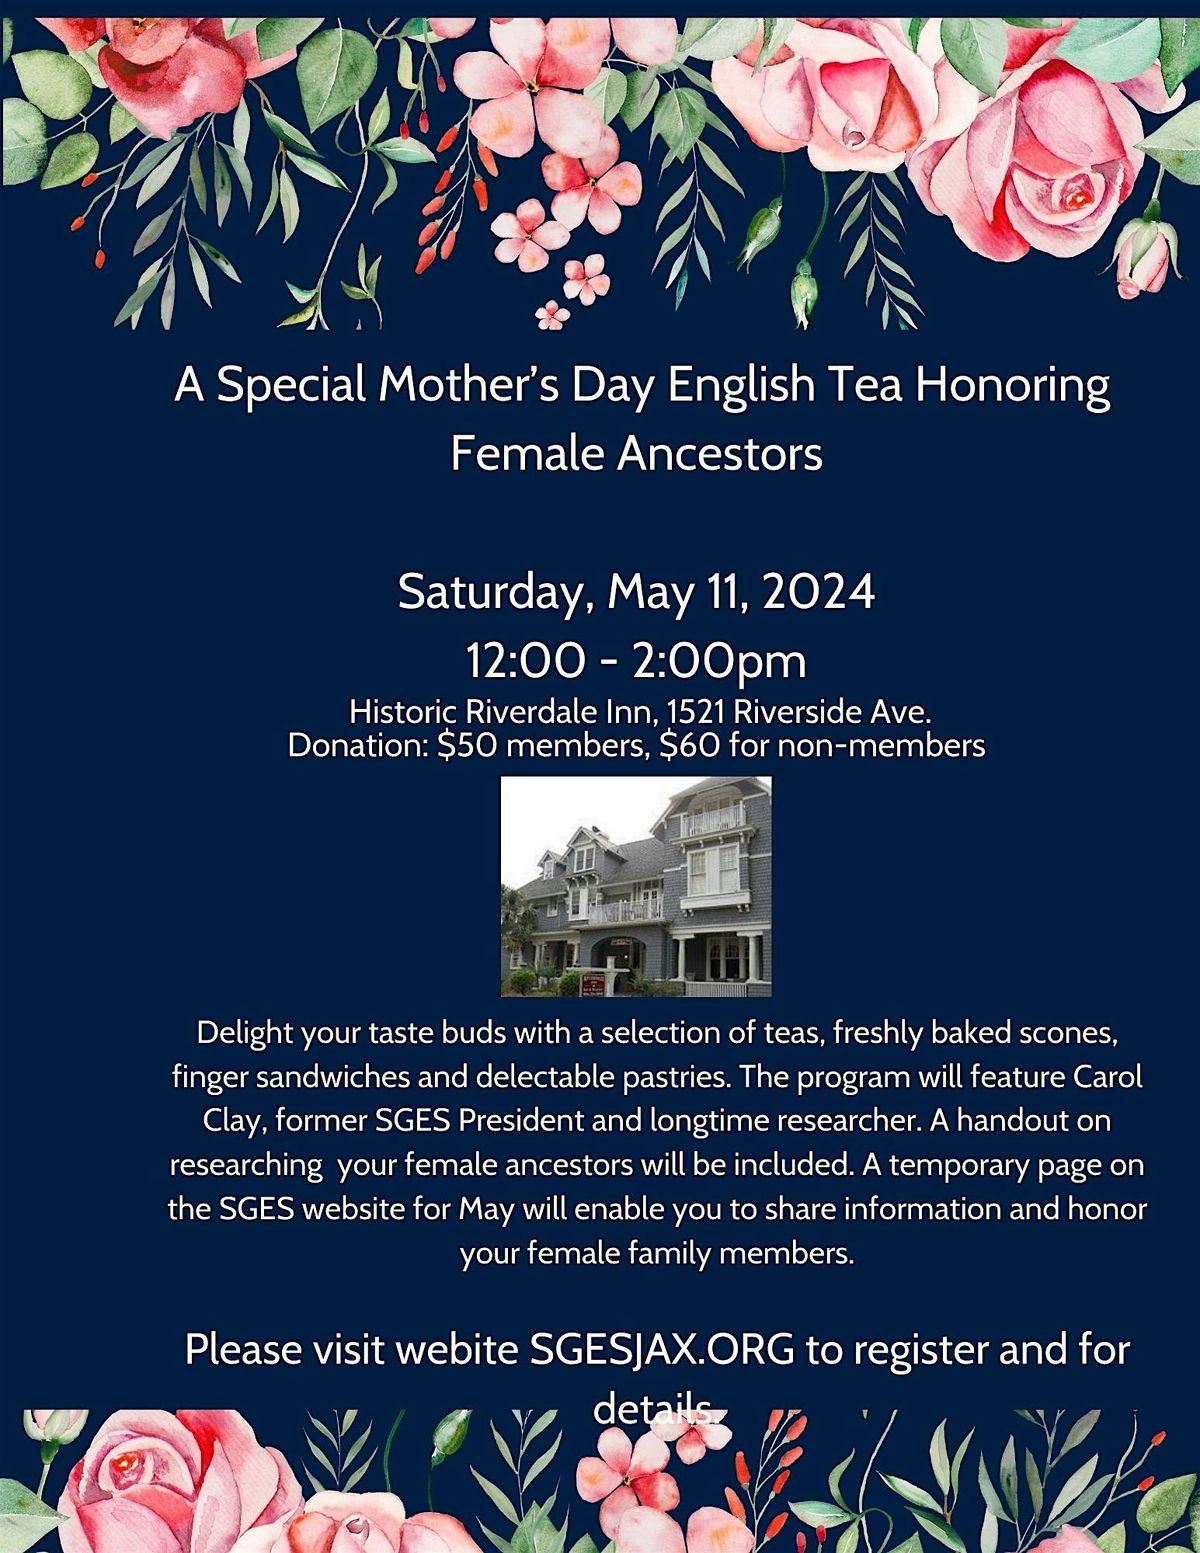 SGES Special Mother's Day English Tea Honoring Female Ancestor's